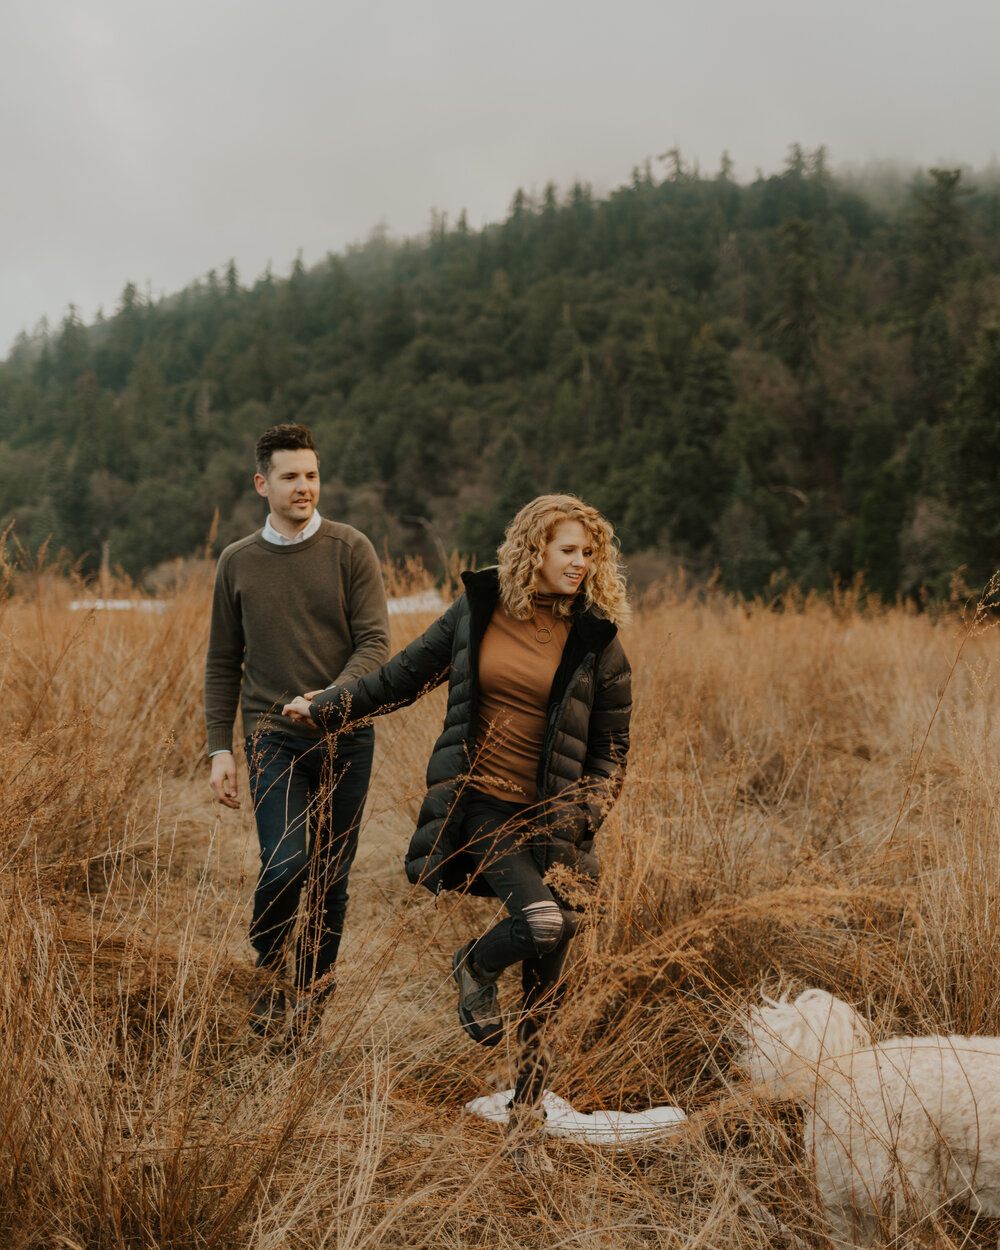 An engaged couple and their dog at Doane Pond at Palomar Mountain